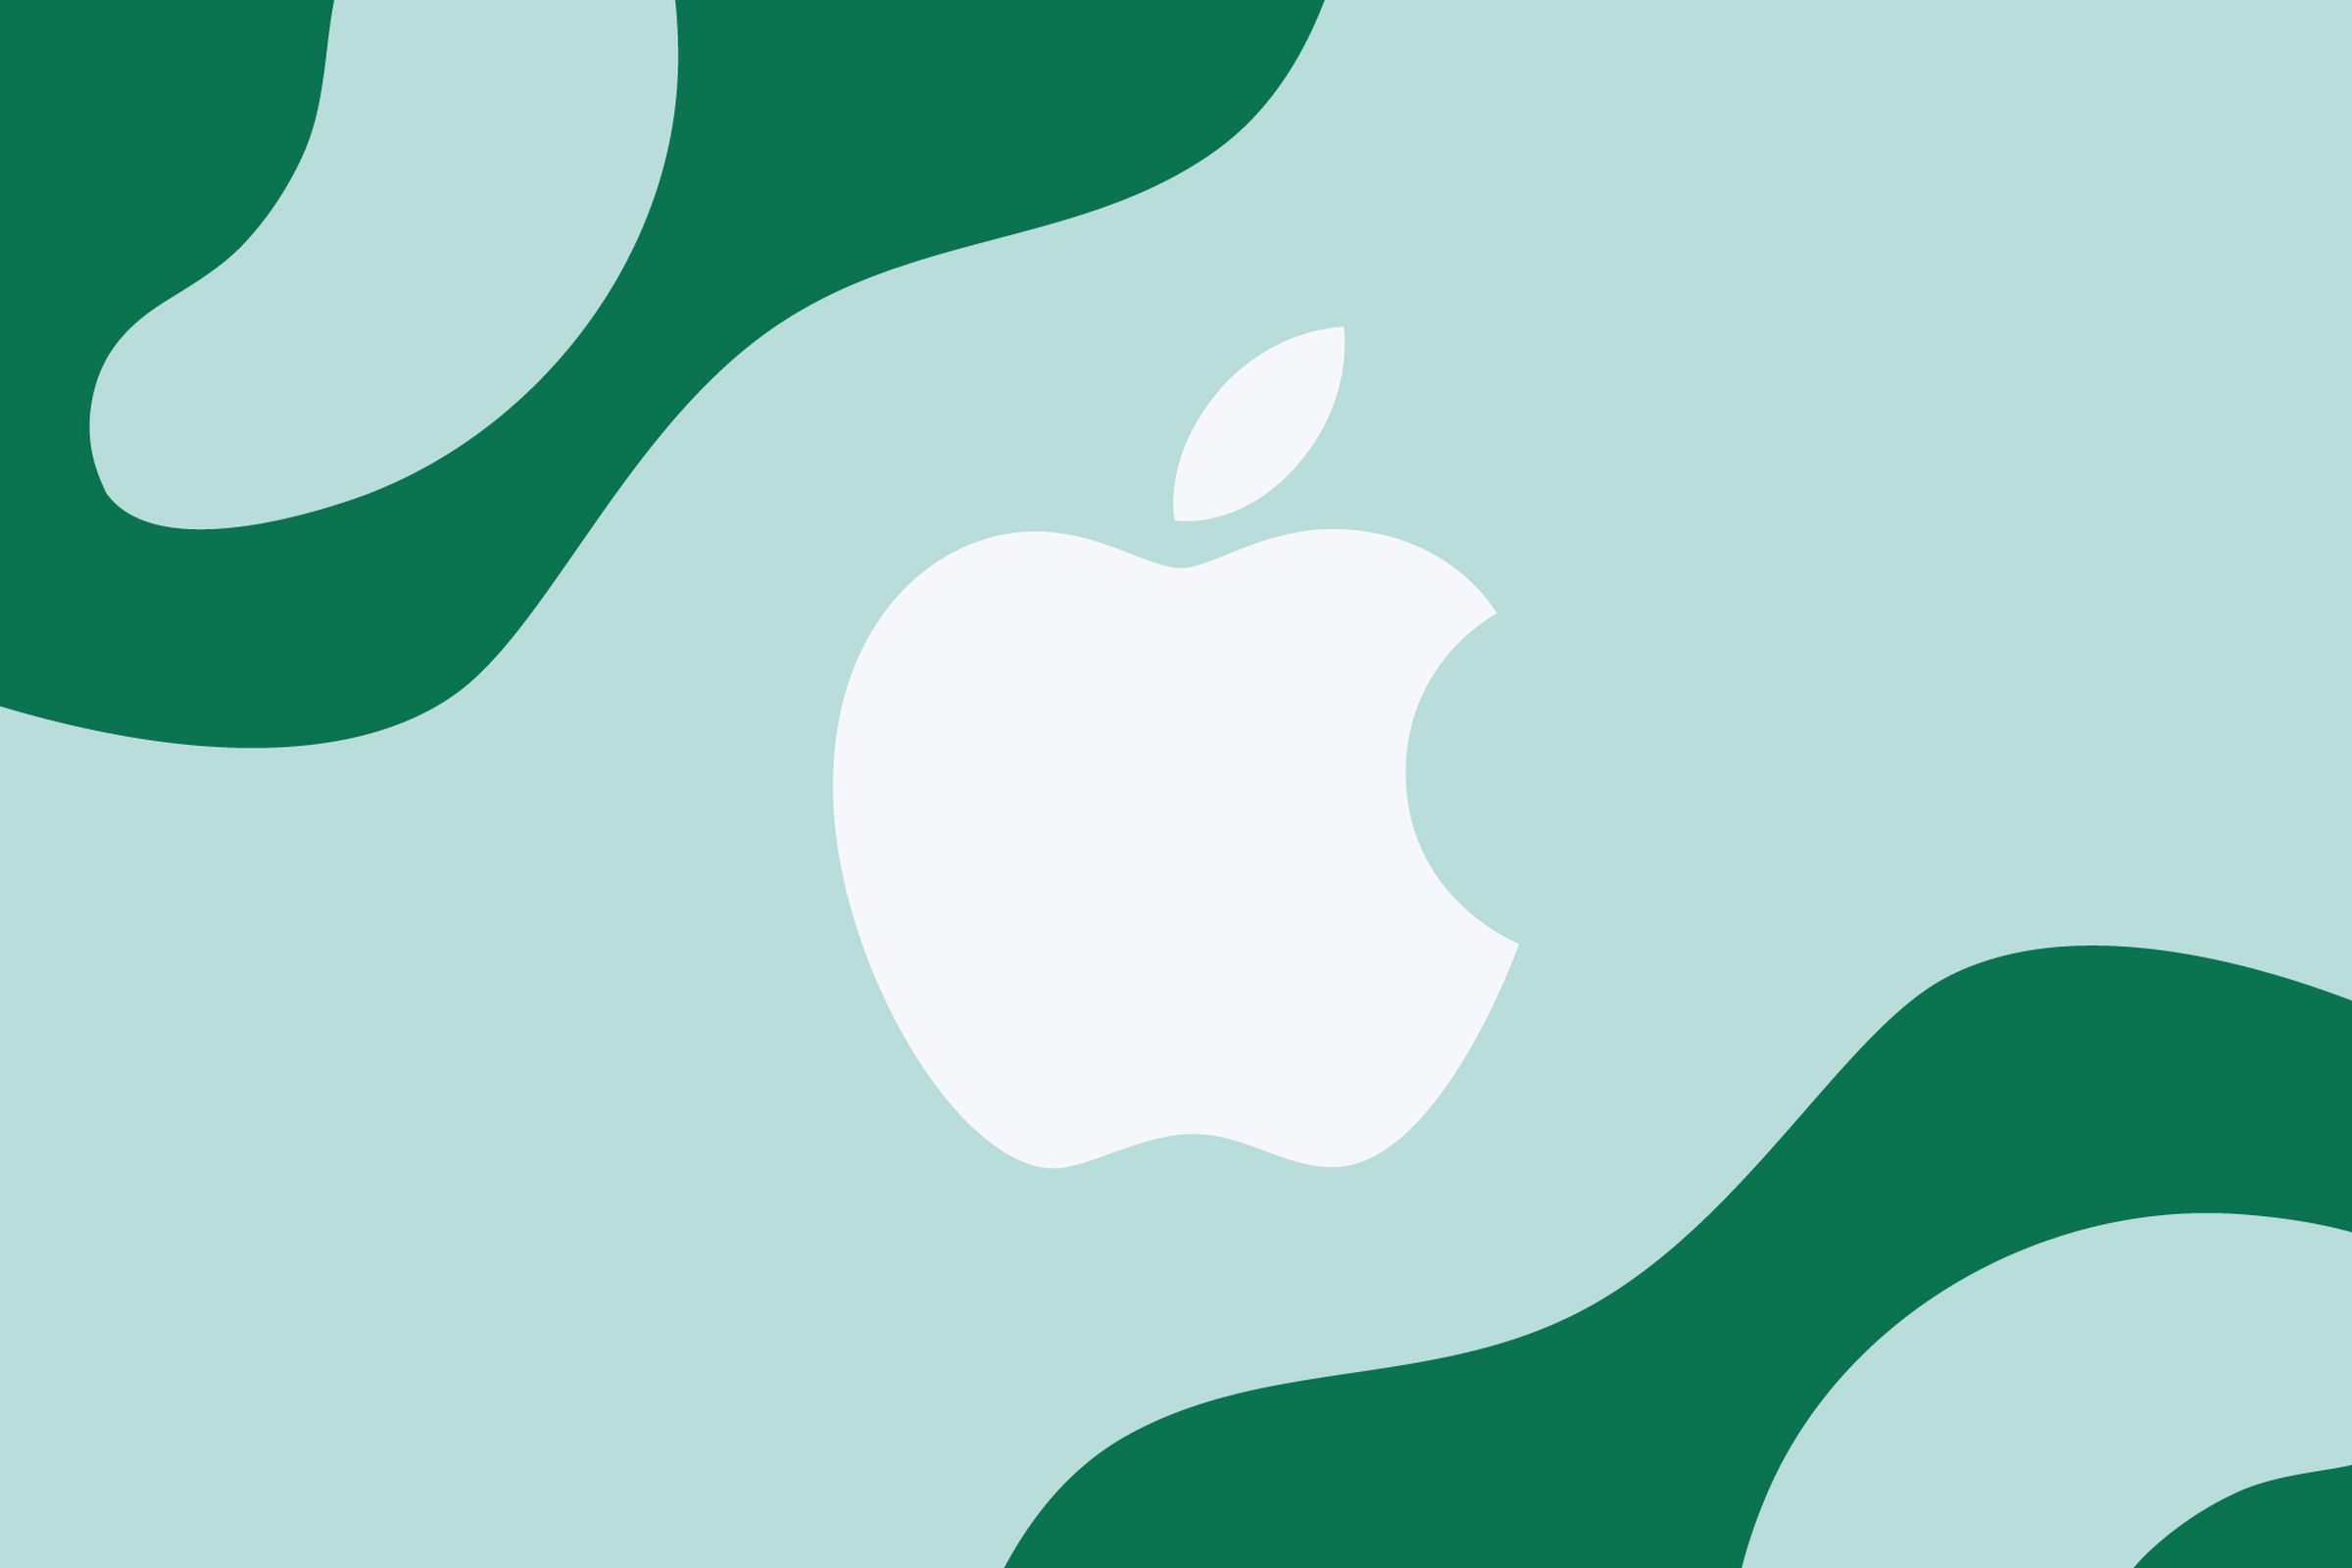 Apple logo Wallpaper for iPhone 11, Pro Max, X, 8, 7, 6 - Free Download on  3Wallpapers